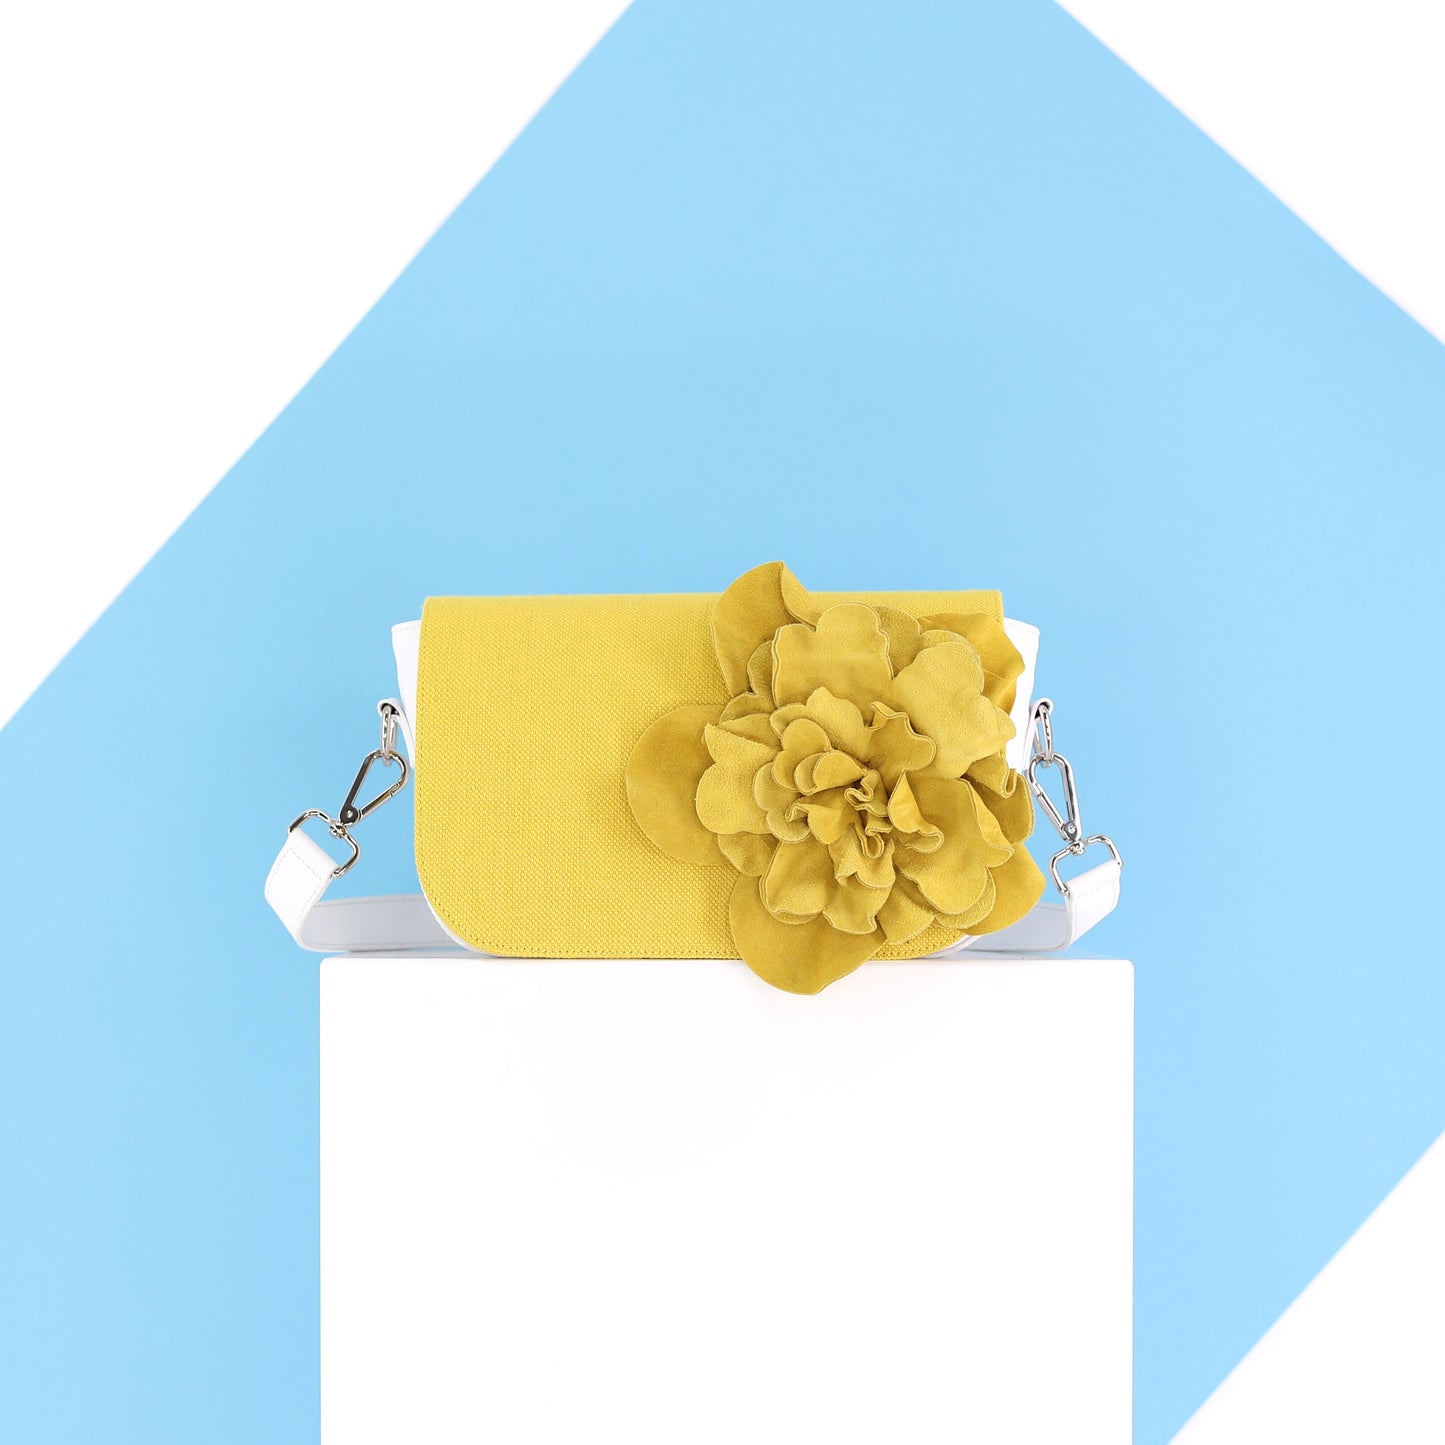 FLOWER POWER flap fabric yellow small - PREORDER